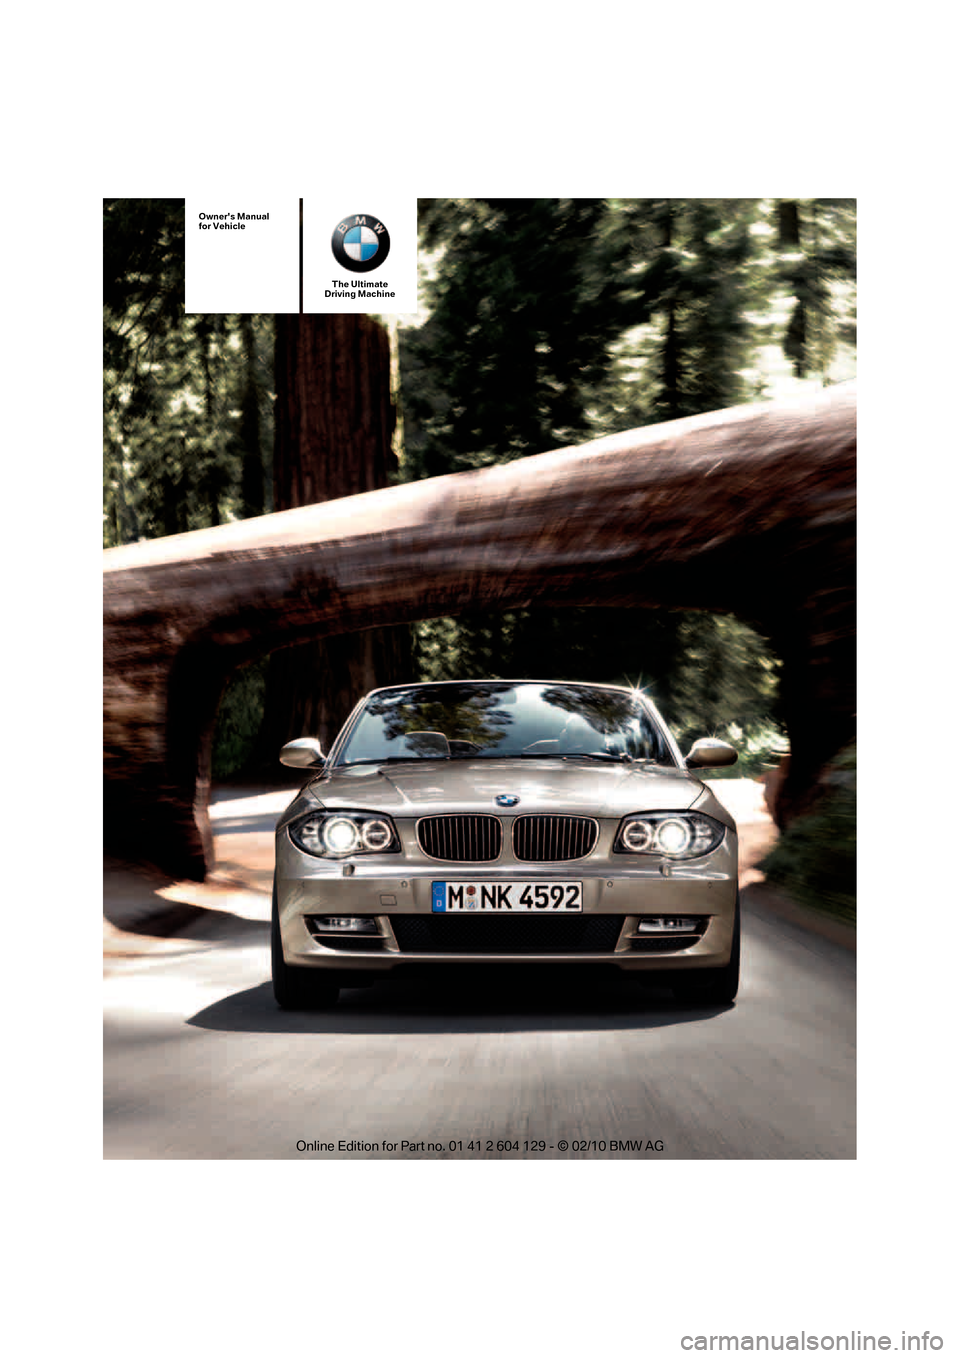 BMW 135I CONVERTIBLE 2011 E88 Owners Manual The Ultimate
Driving Machine
Owners Manual
for Vehicle 